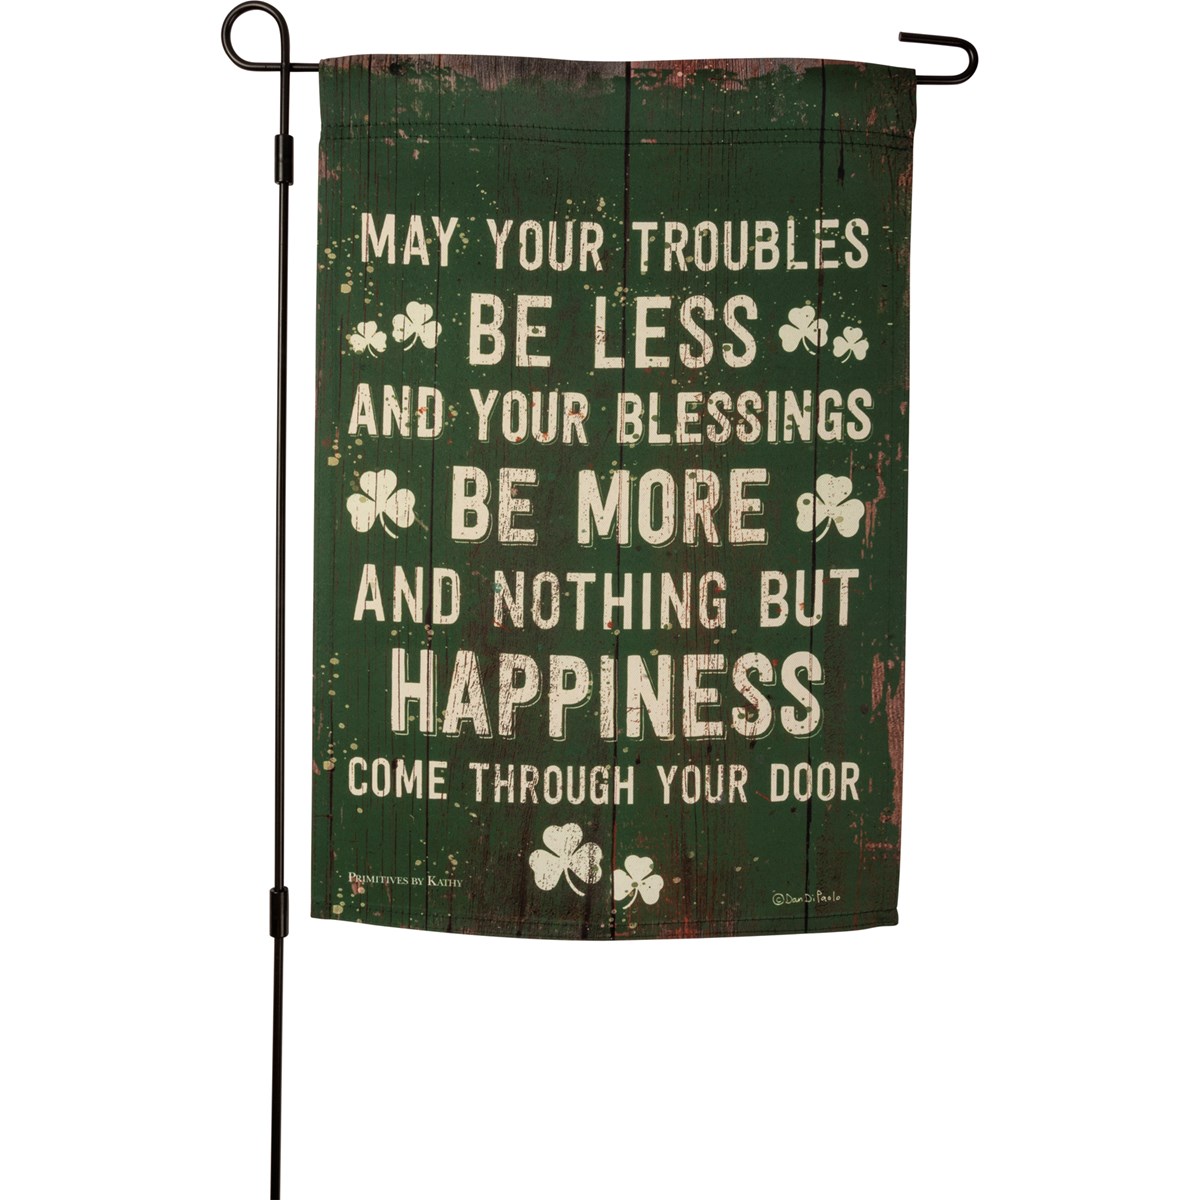 Garden Flag - May Your Troubles Be Less - 12" x 18" - Polyester